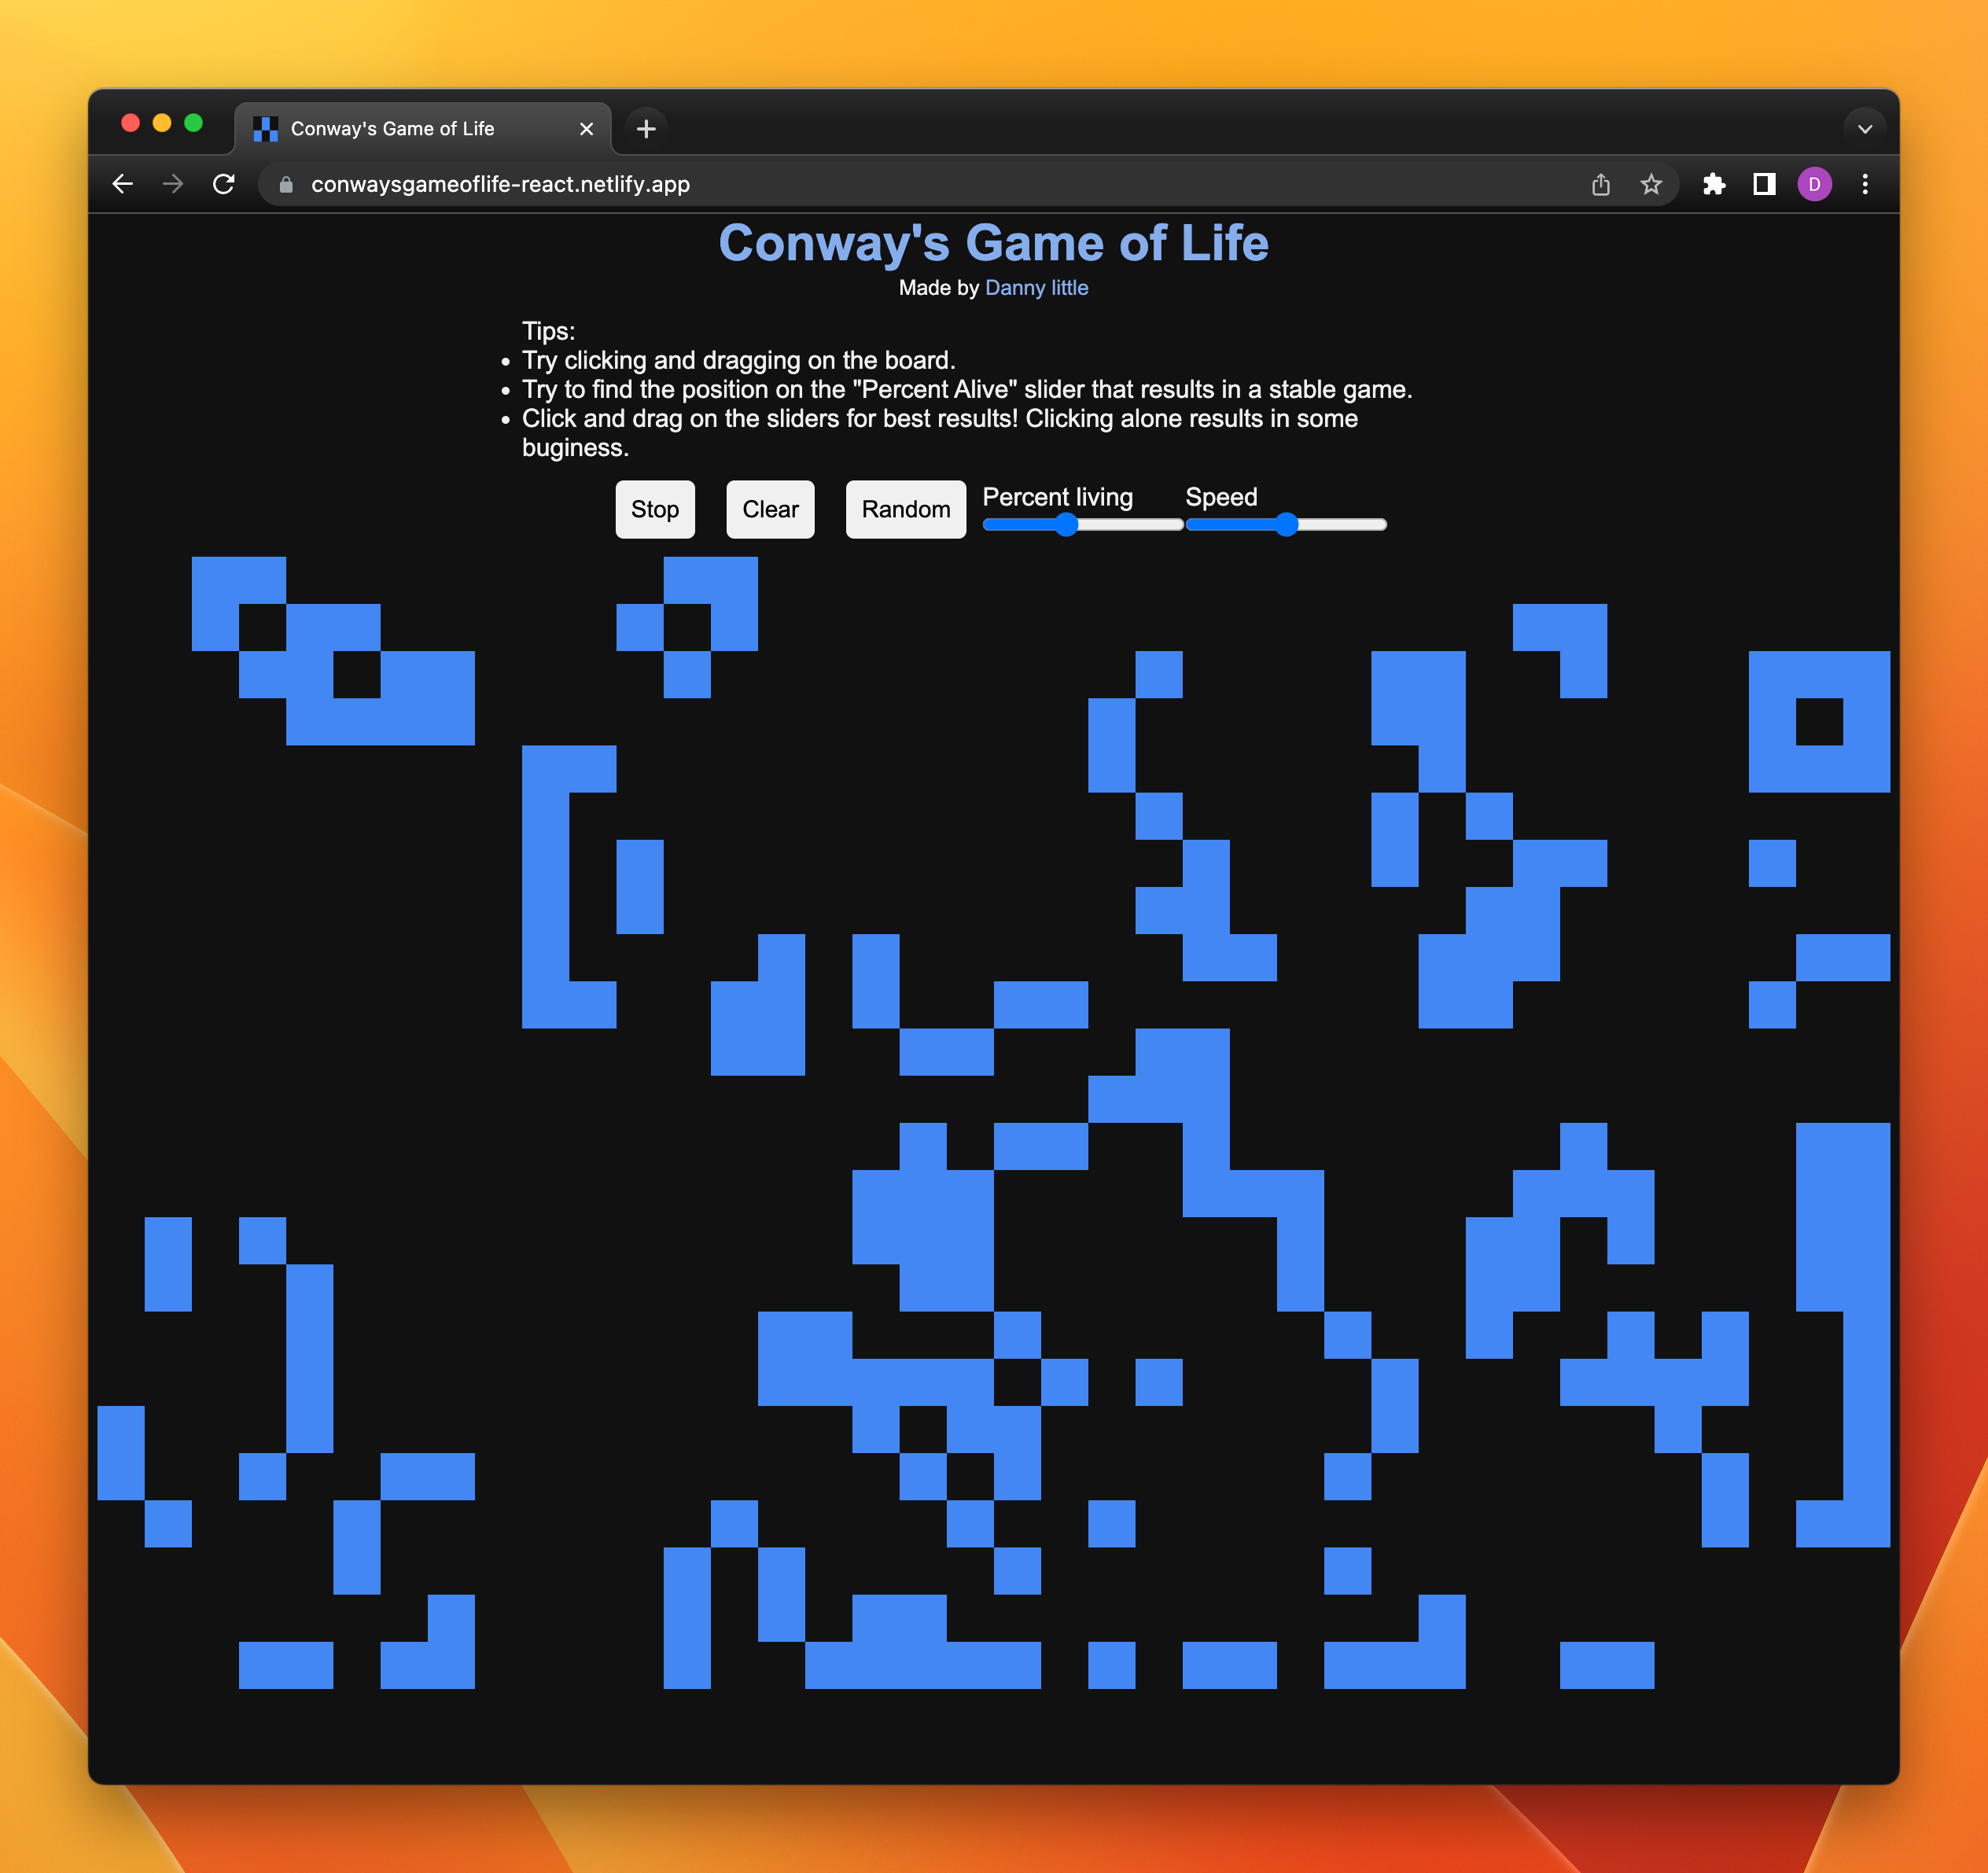 image of conway's game of life implementation